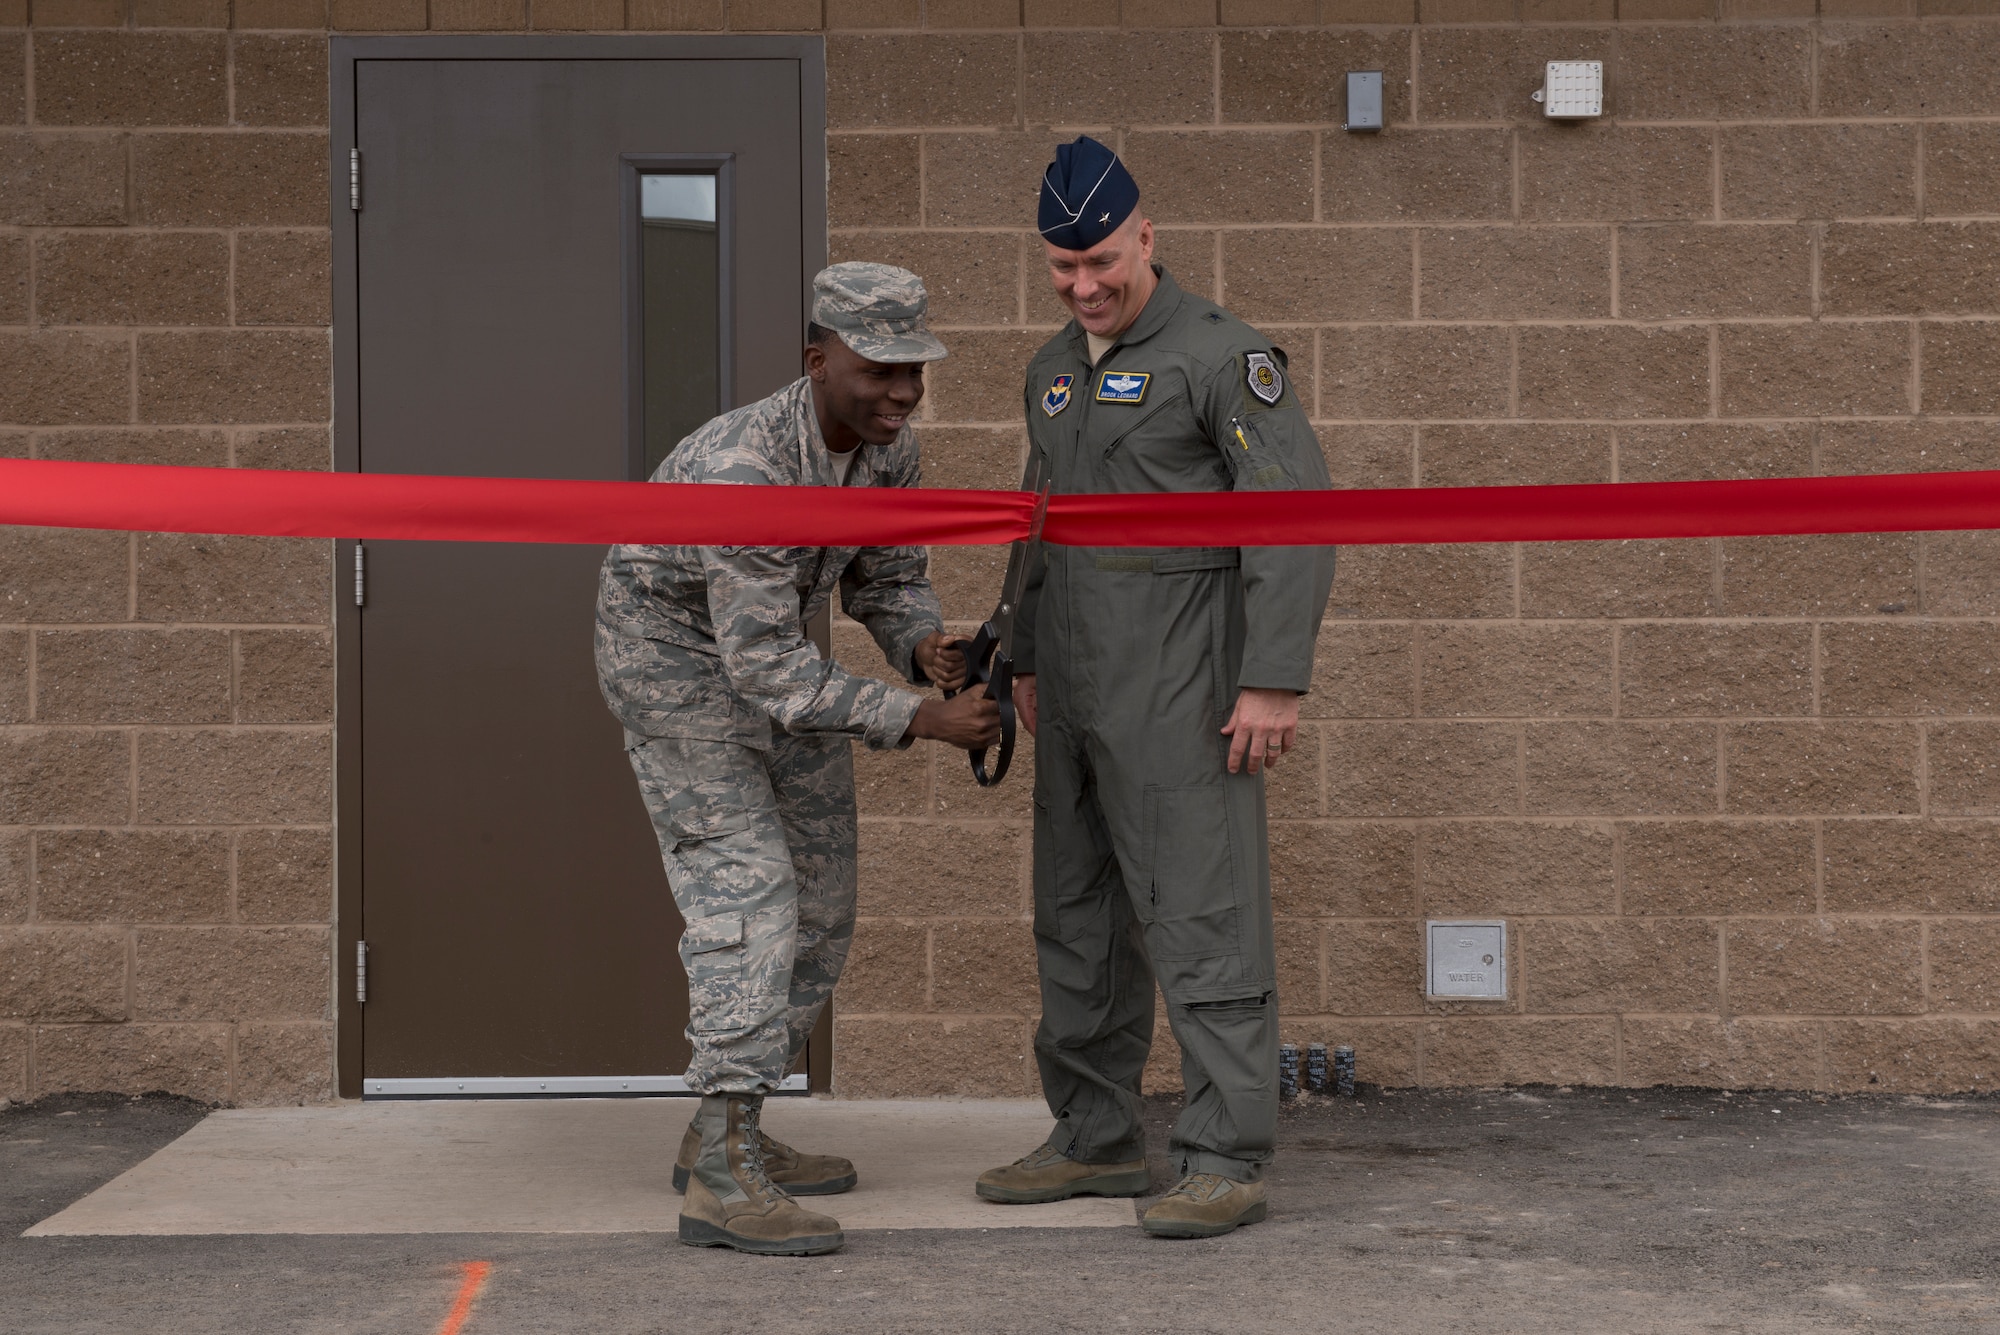 Airman Johnny Jackson, 56th Logistics Readiness Squadron Fuels Management operator, cuts the ribbon with Brig. Gen. Brook Leonard, 56th Fighter Wing commander, to open the new fuel pump house at Luke Air Force Base, Ariz., March 15, 2018. Leonard and other members of Luke’s command team were present for the pump house’s ribbon-cutting ceremony. (U.S. Air Force photo by Senior Airman Ridge Shan)